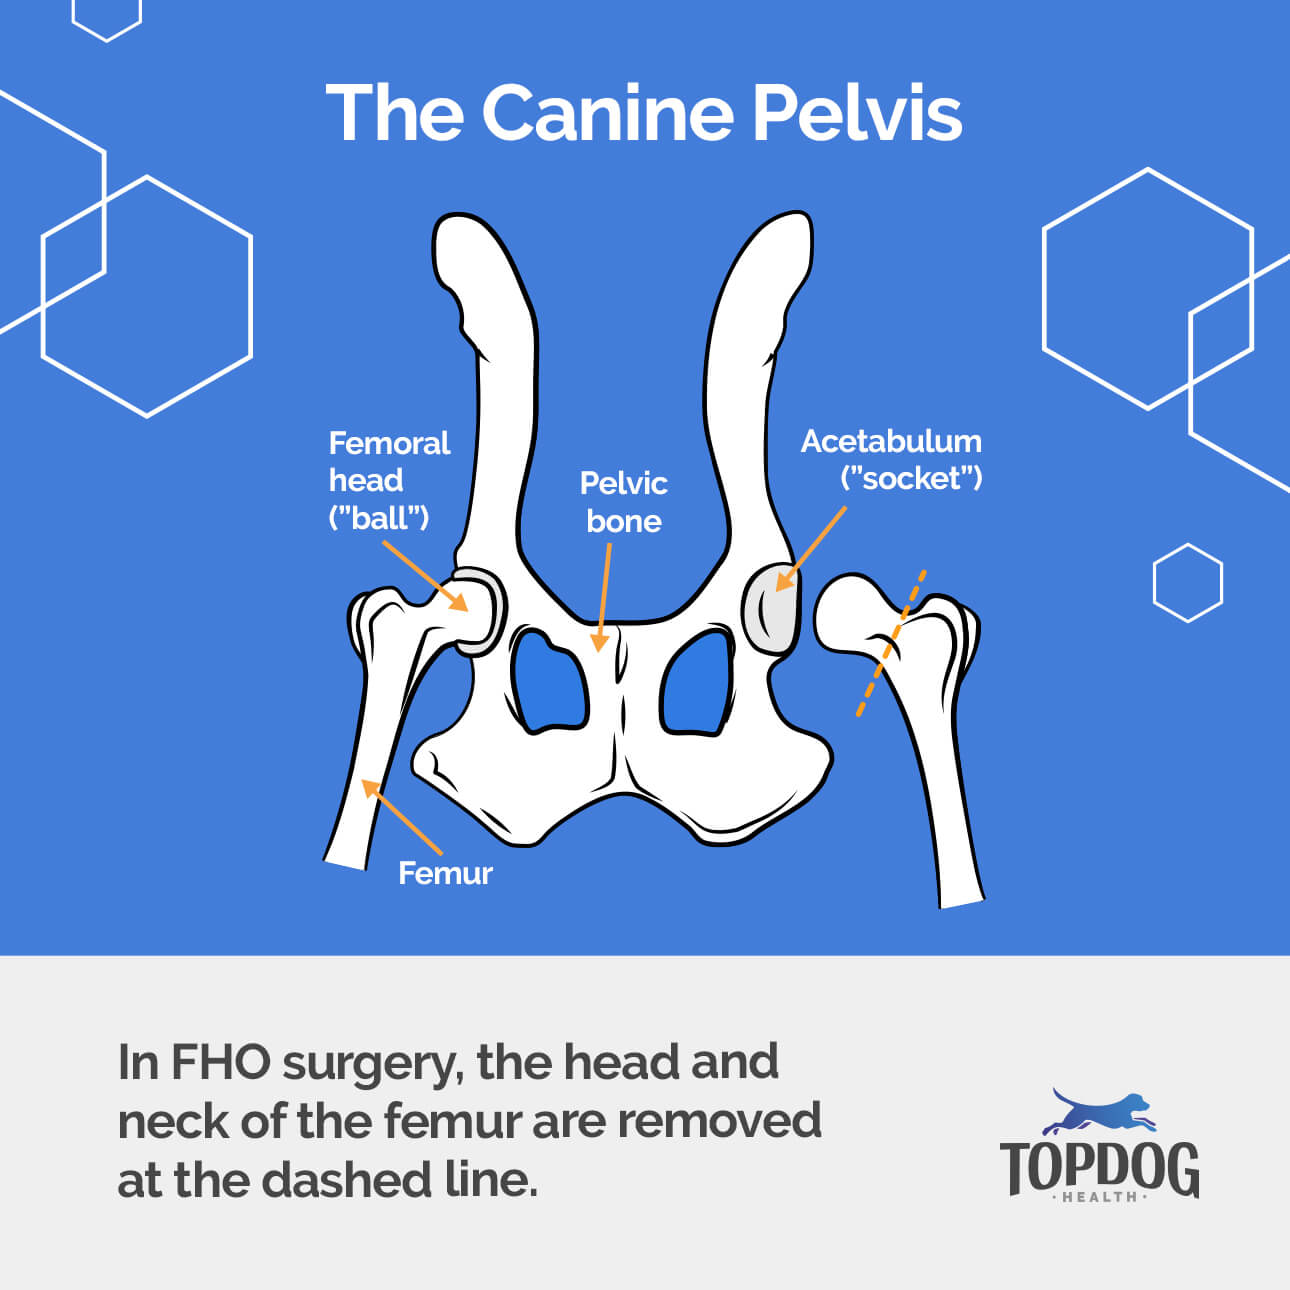 FHO Surgery Diagram of the canine pelvis: In FHO surgery, the head and neck of the femur are removed at the dashed line.